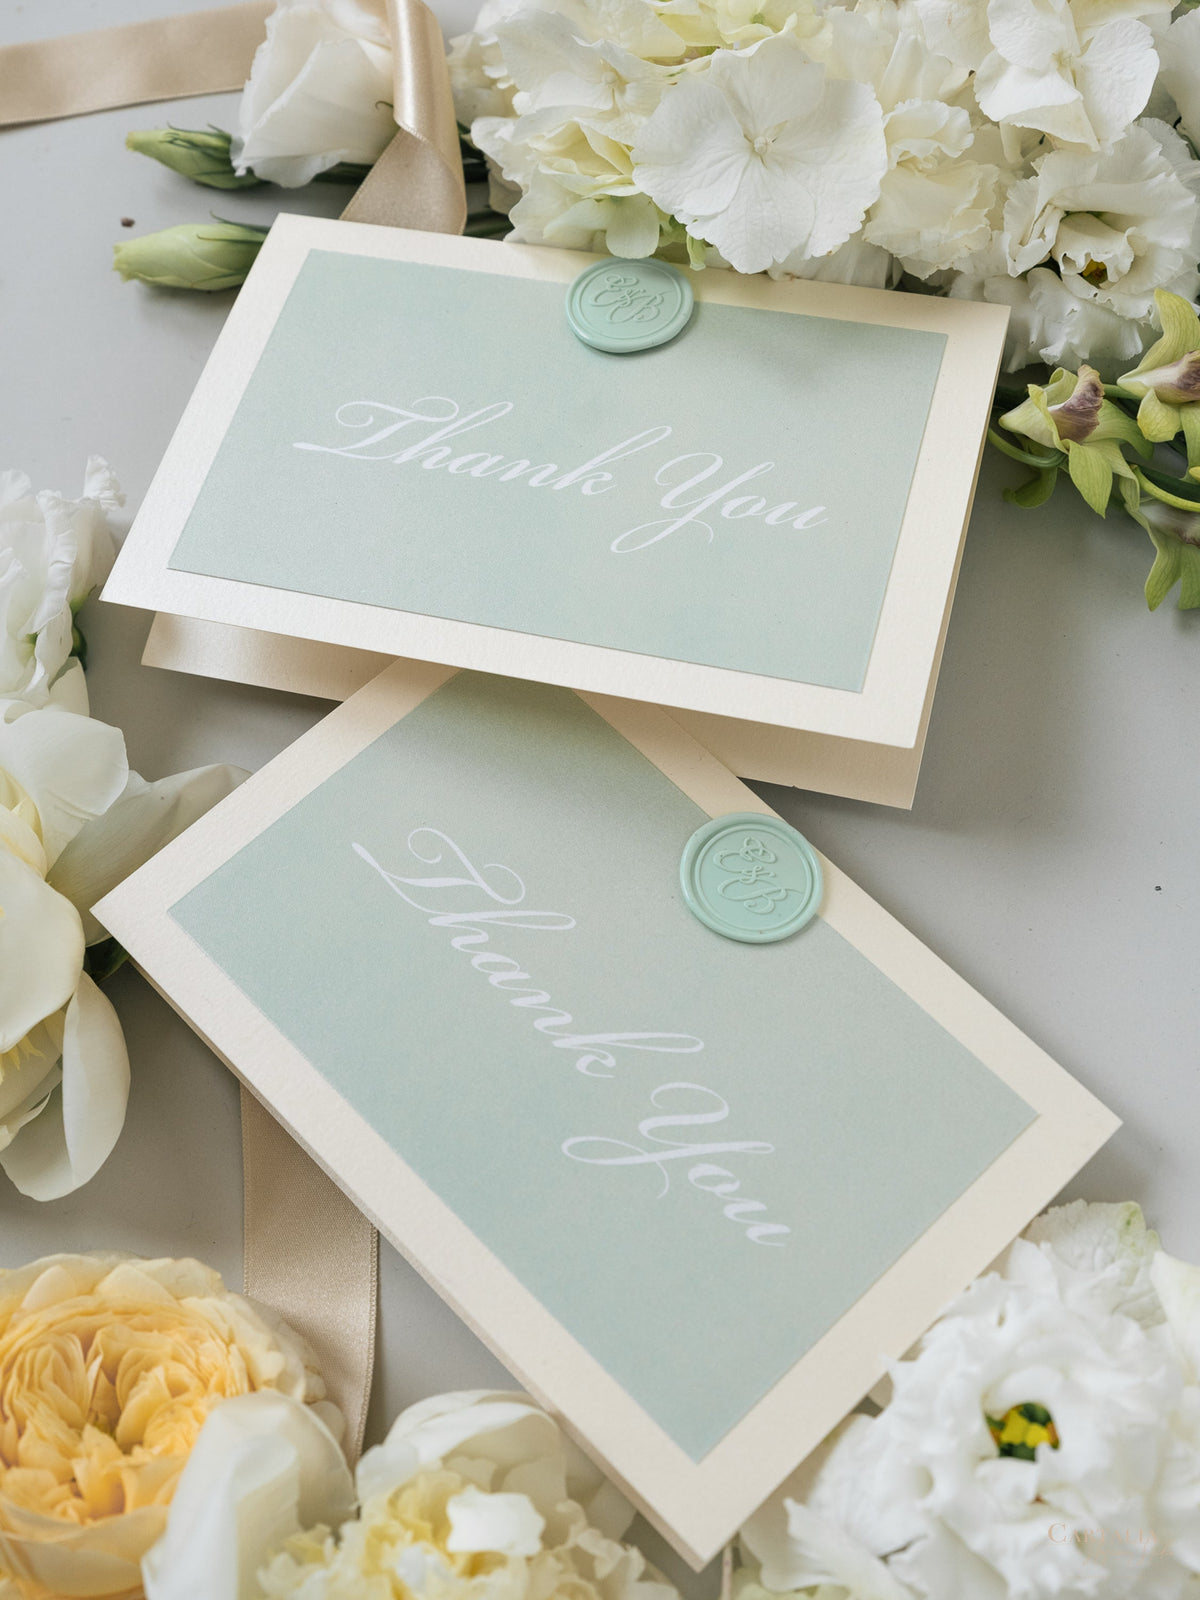 Sage Green & Champagne Thank You Cards with Bespoke Wax Seal